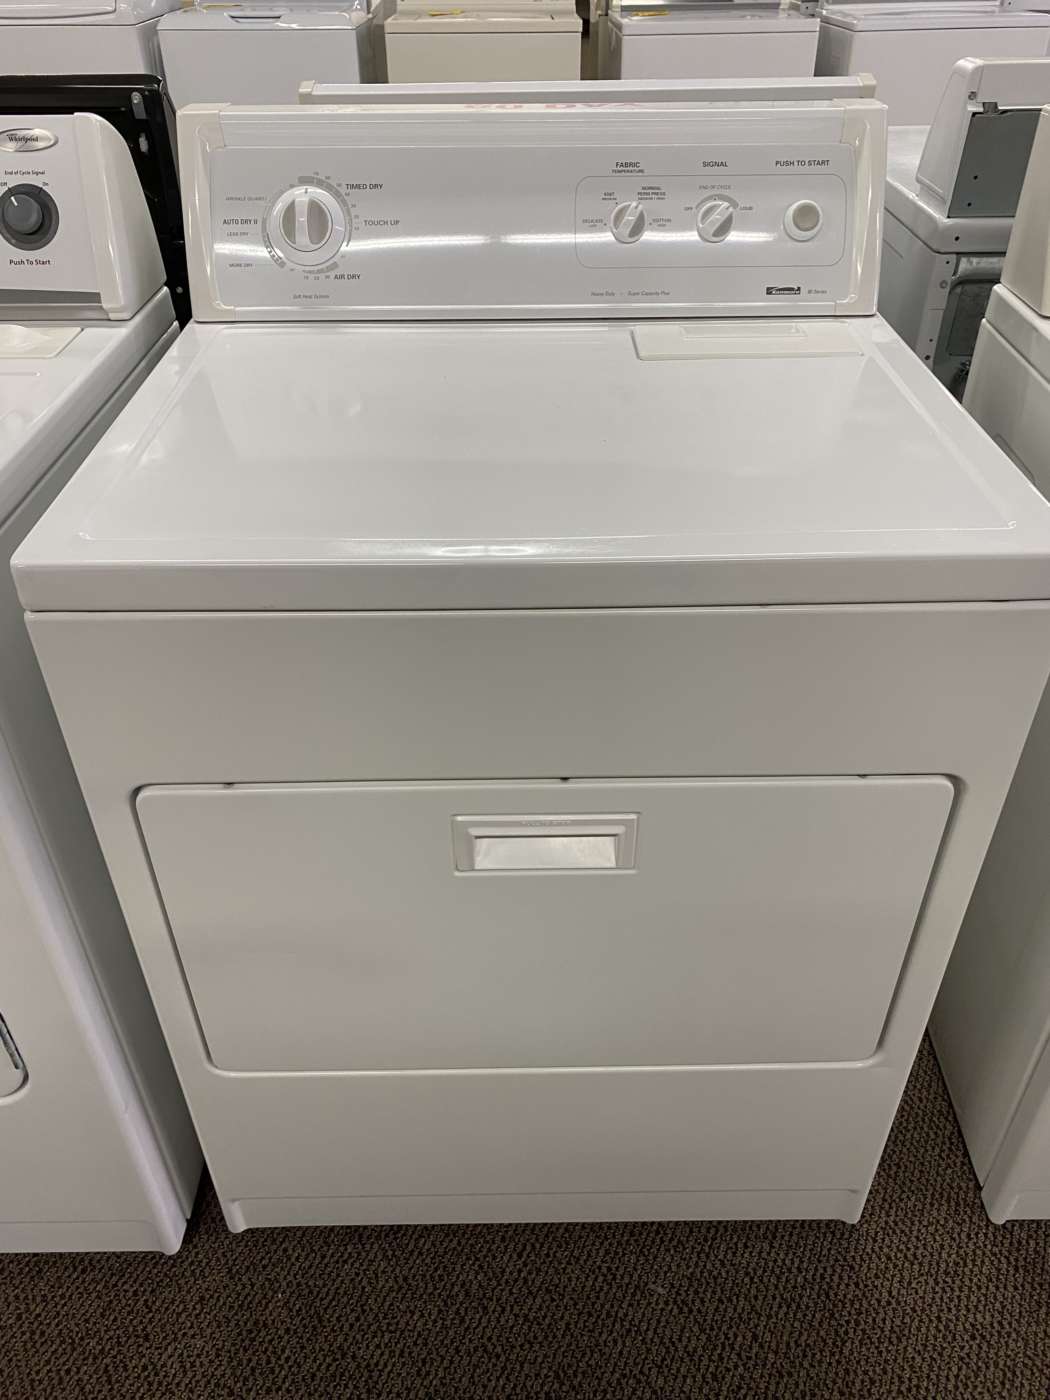 Reconditioned KENMORE 6.5 Cu. Ft. Electric Dryer – White